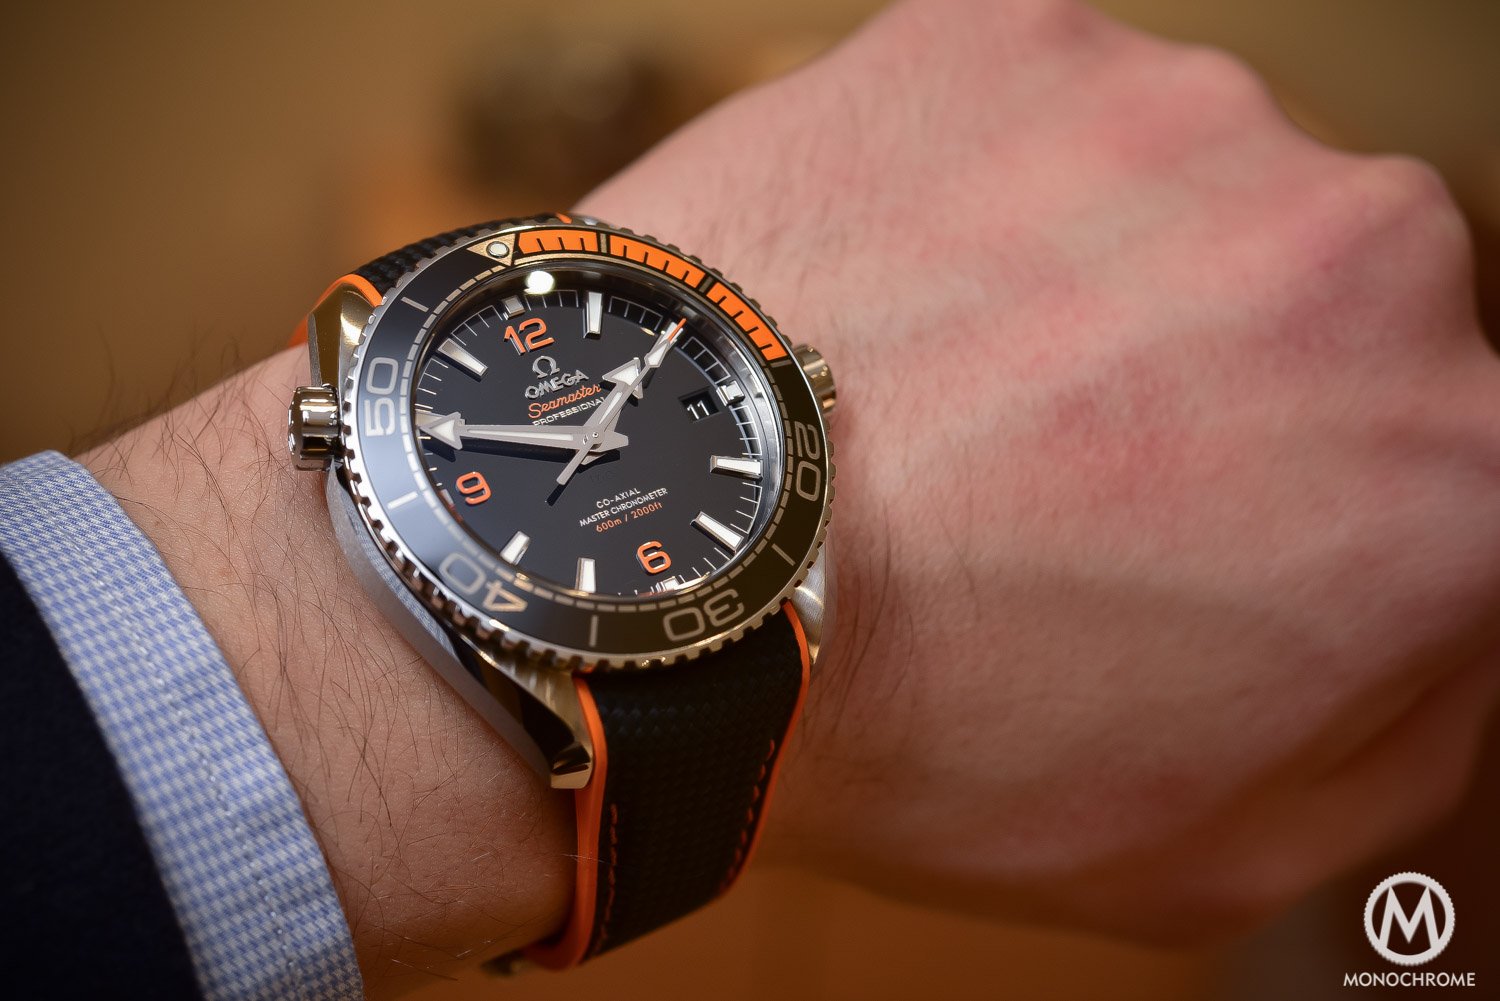 Smaller is Better? Case study with the 39.5mm Omega